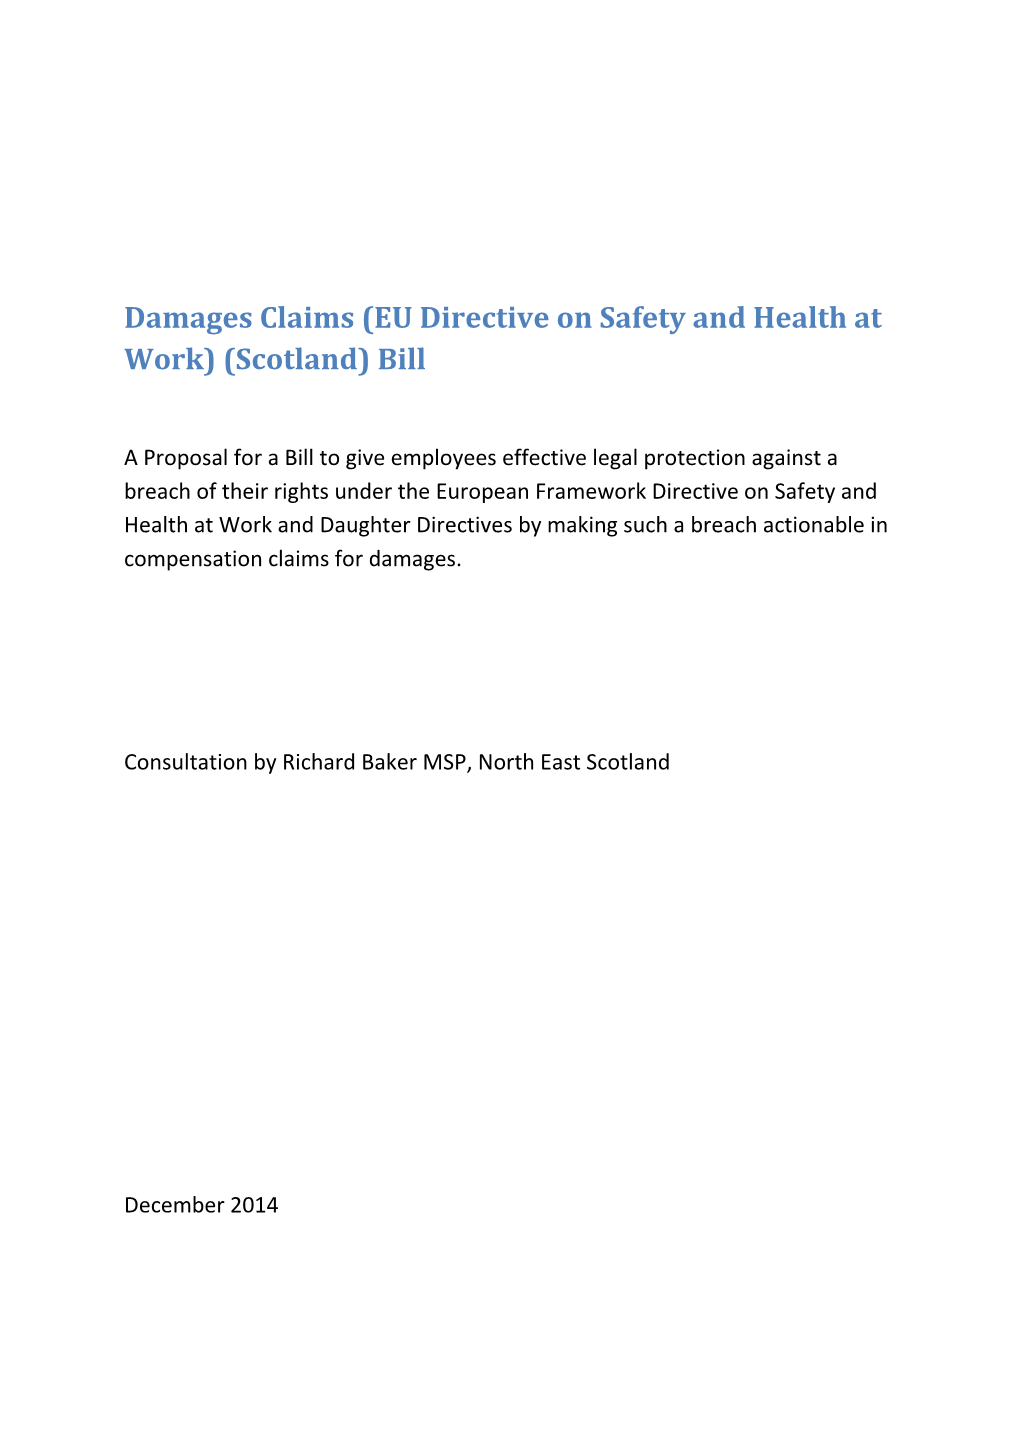 Damages Claims (EU Directive on Safety and Health at Work) (Scotland) Bill